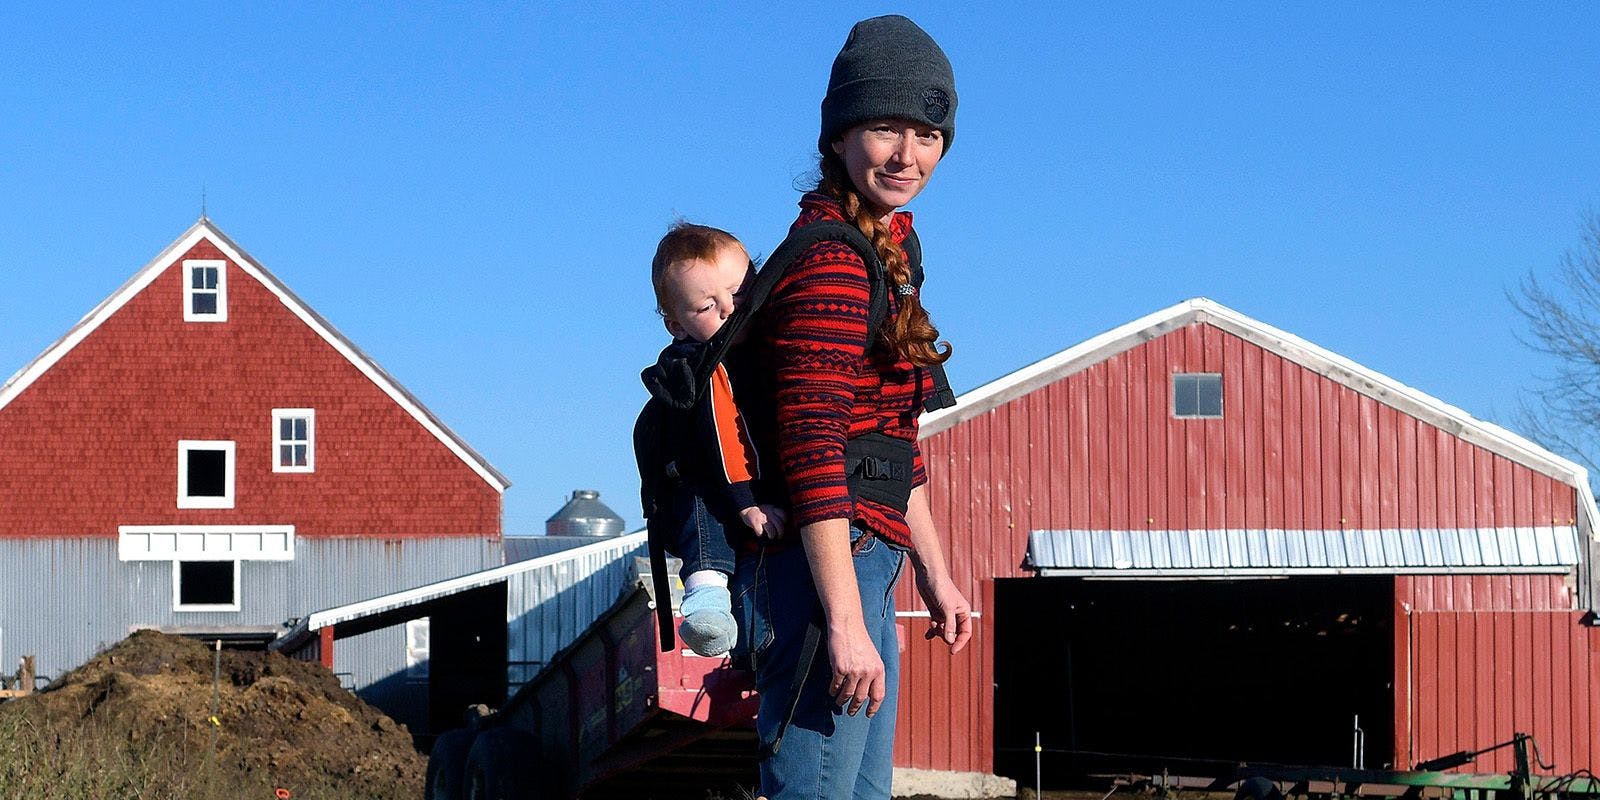 Caption: Alexis and Rory MacDonald are seen at their Maine farm. Photo courtesy of Andy Molloy/Kennebec Journal and centralmaine.com.